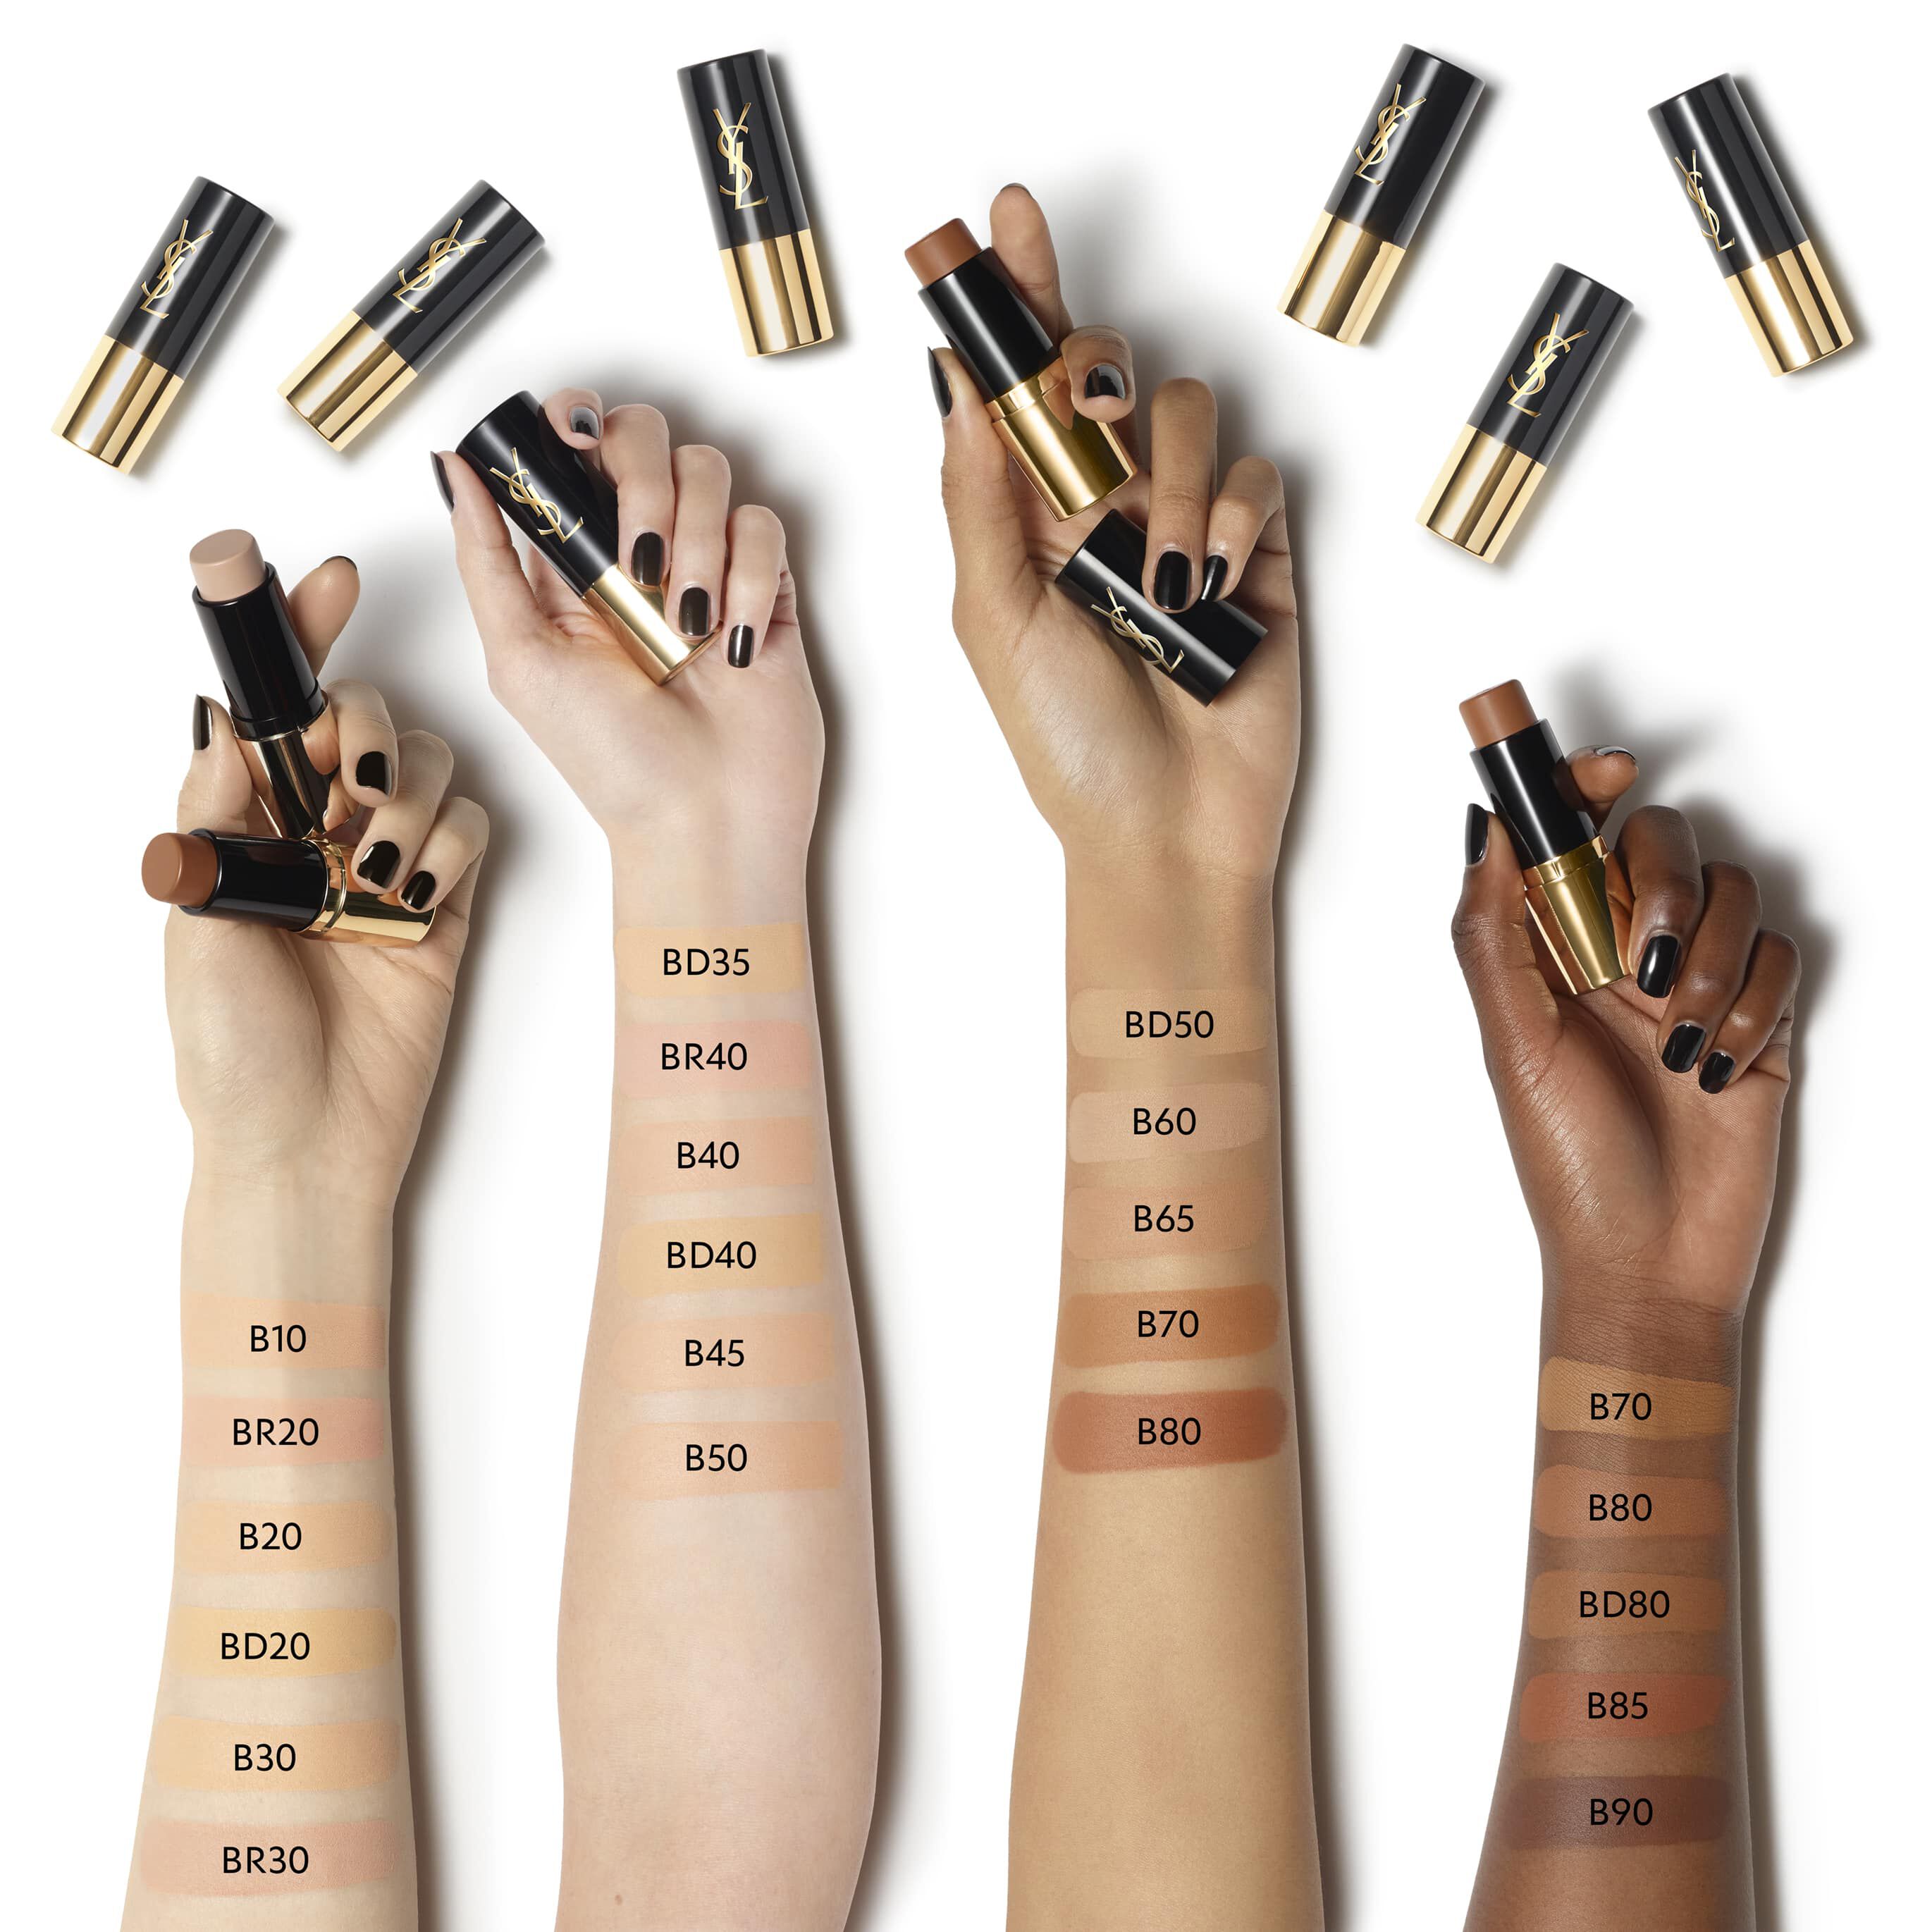 All Hours Foundation Stick